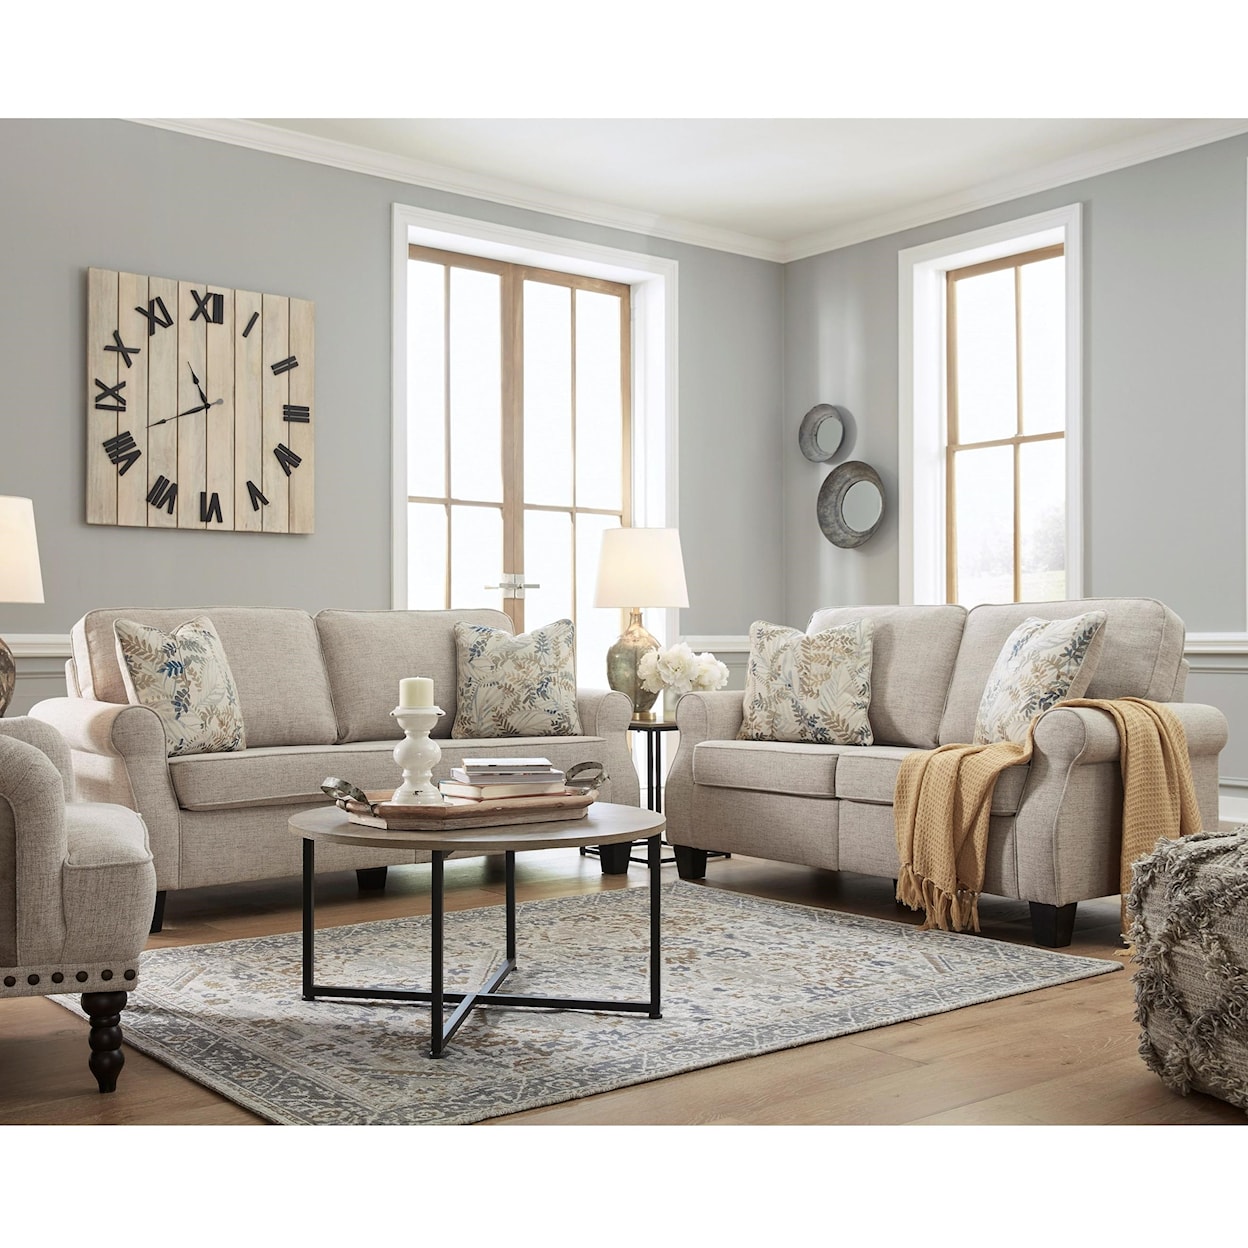 Signature Design by Ashley Alessio Living Room Group